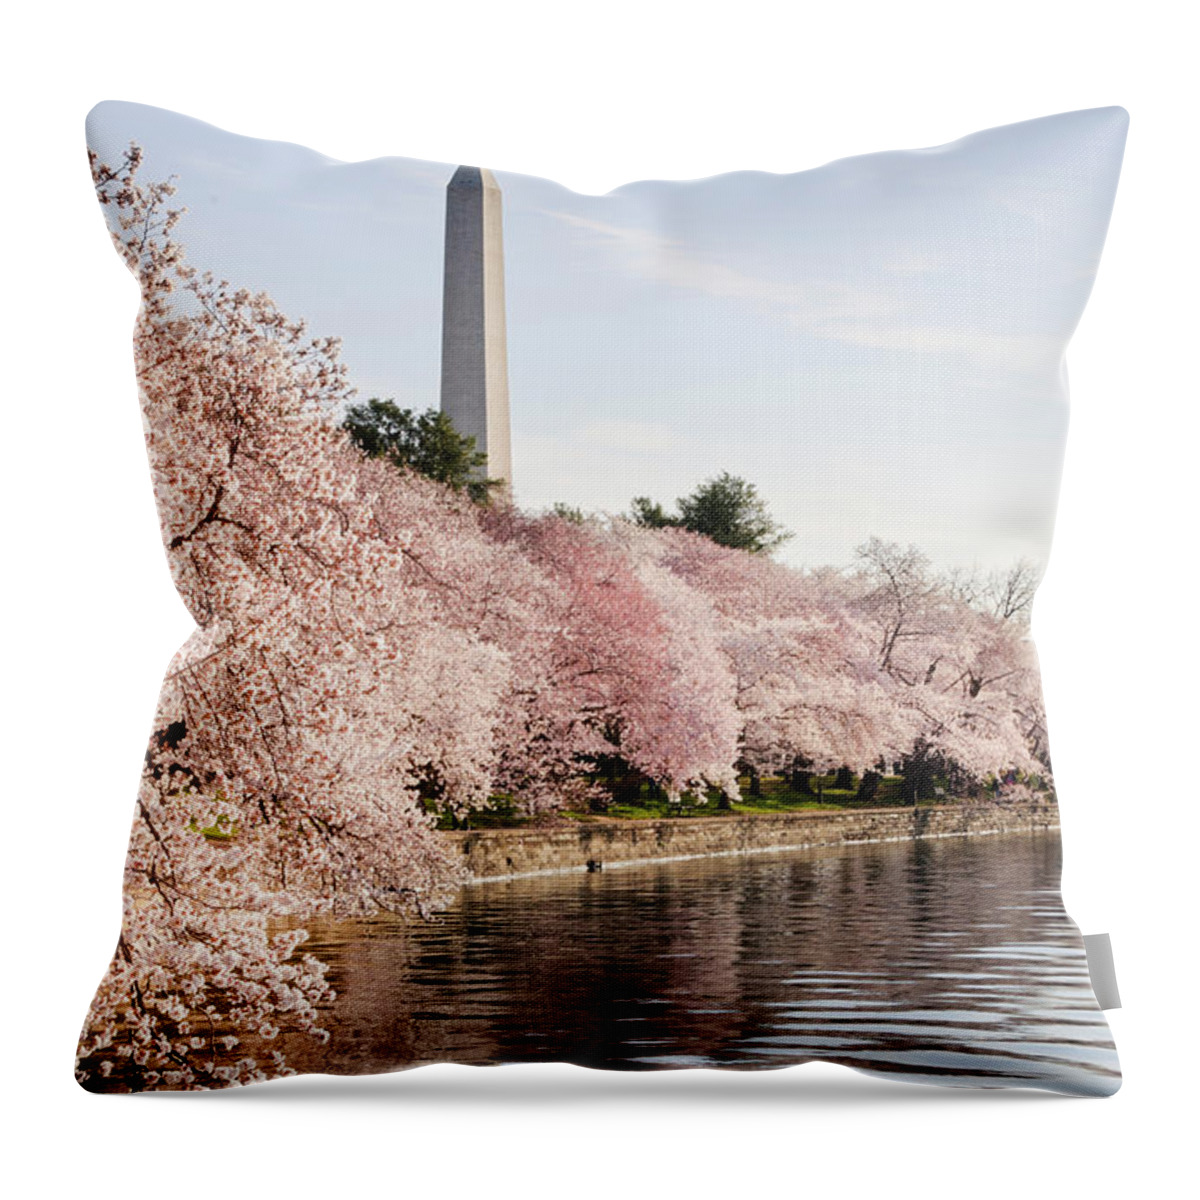 Tidal Basin Throw Pillow featuring the photograph Washington Dc Cherry Blossoms And by Ogphoto